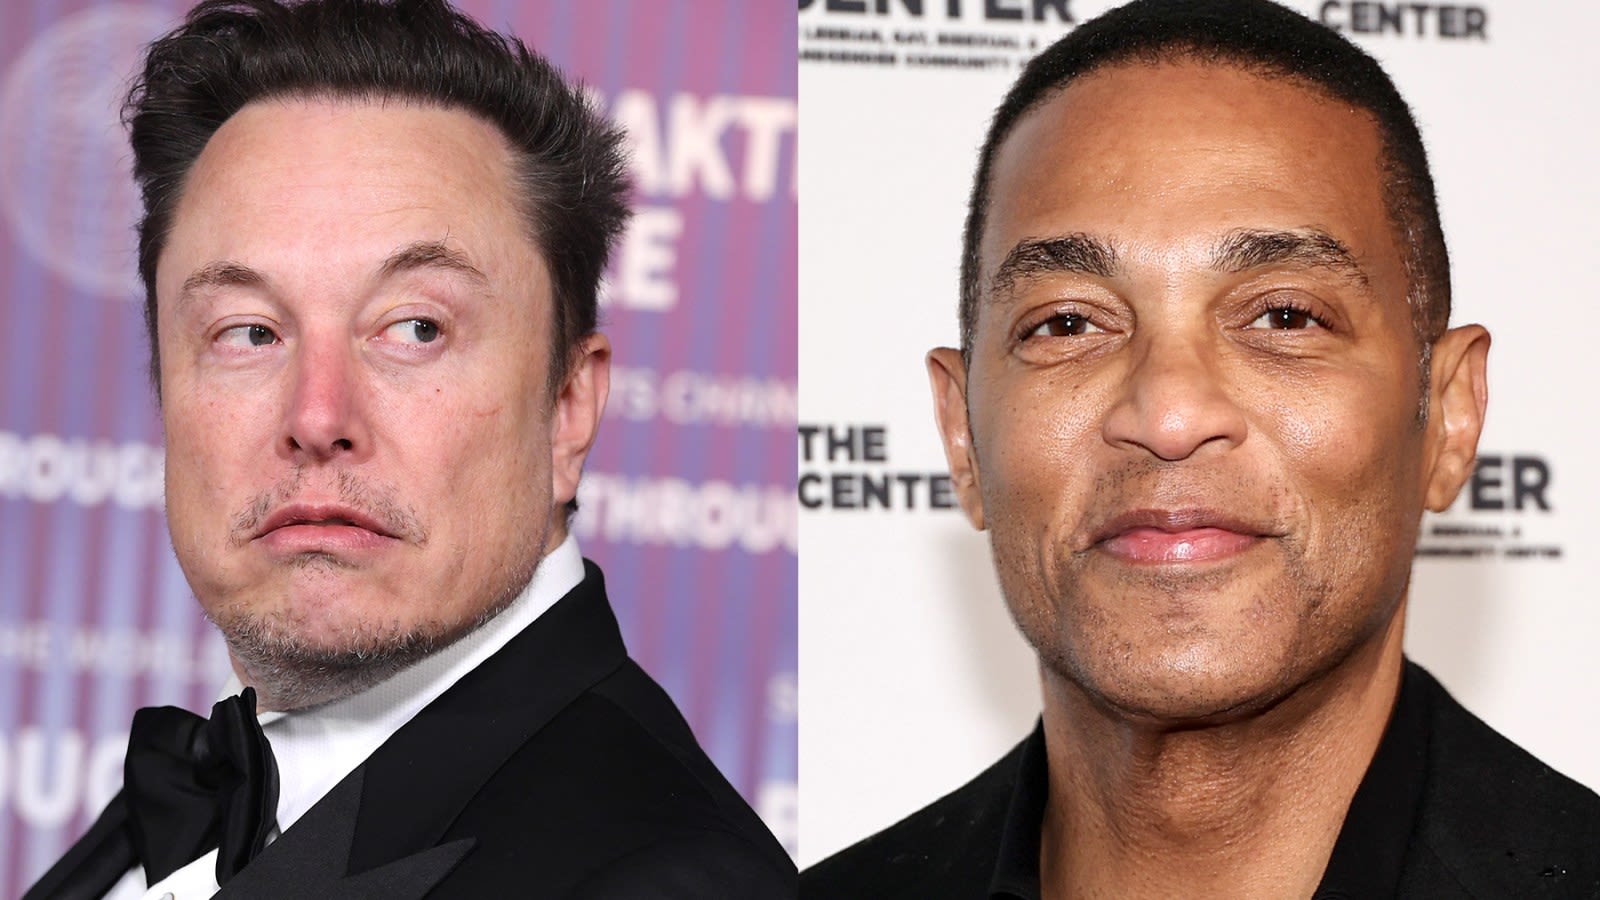 Elon Musk Claims He Squeezed Out Don Lemon Over 'Impressively Insane Demands'